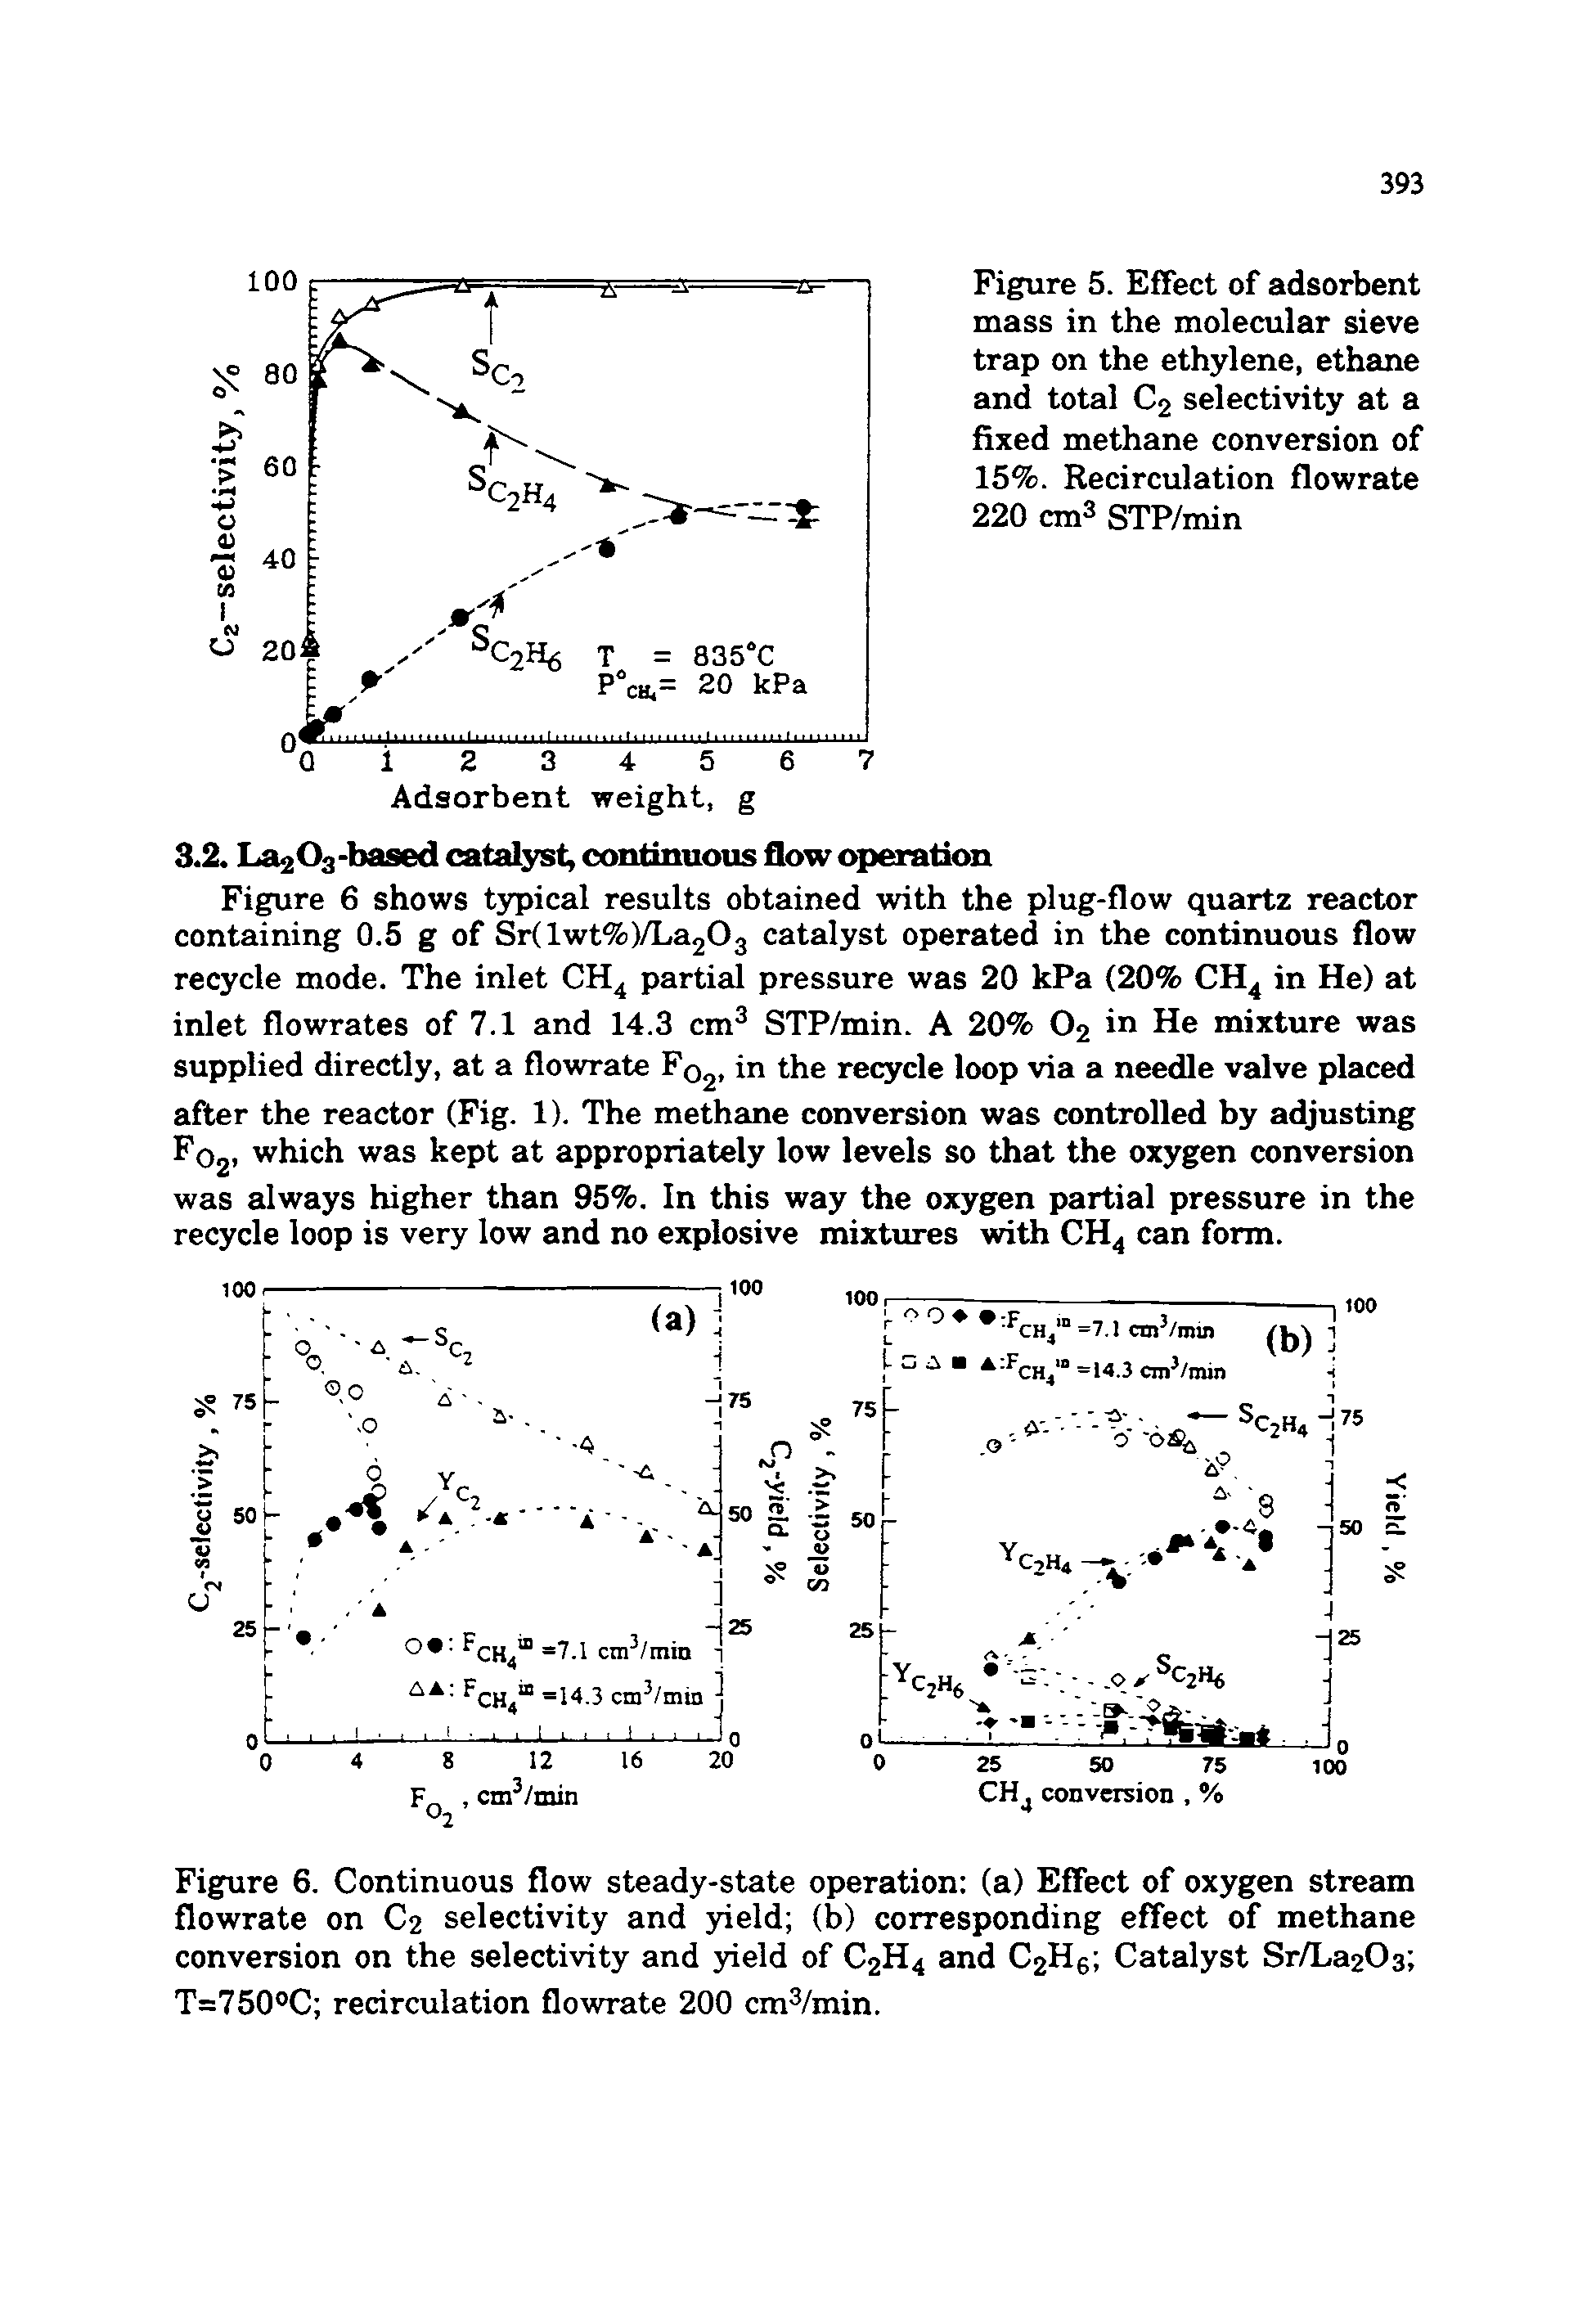 Figure 6. Continuous flow steady-state operation (a) Effect of oxygen stream flowrate on C2 selectivity and yield (b) corresponding effect of methane conversion on the selectivity and yield of C2H4 and C2He Catalyst Sr/LaaOa T=750°C recirculation flowrate 200 cm3/min.